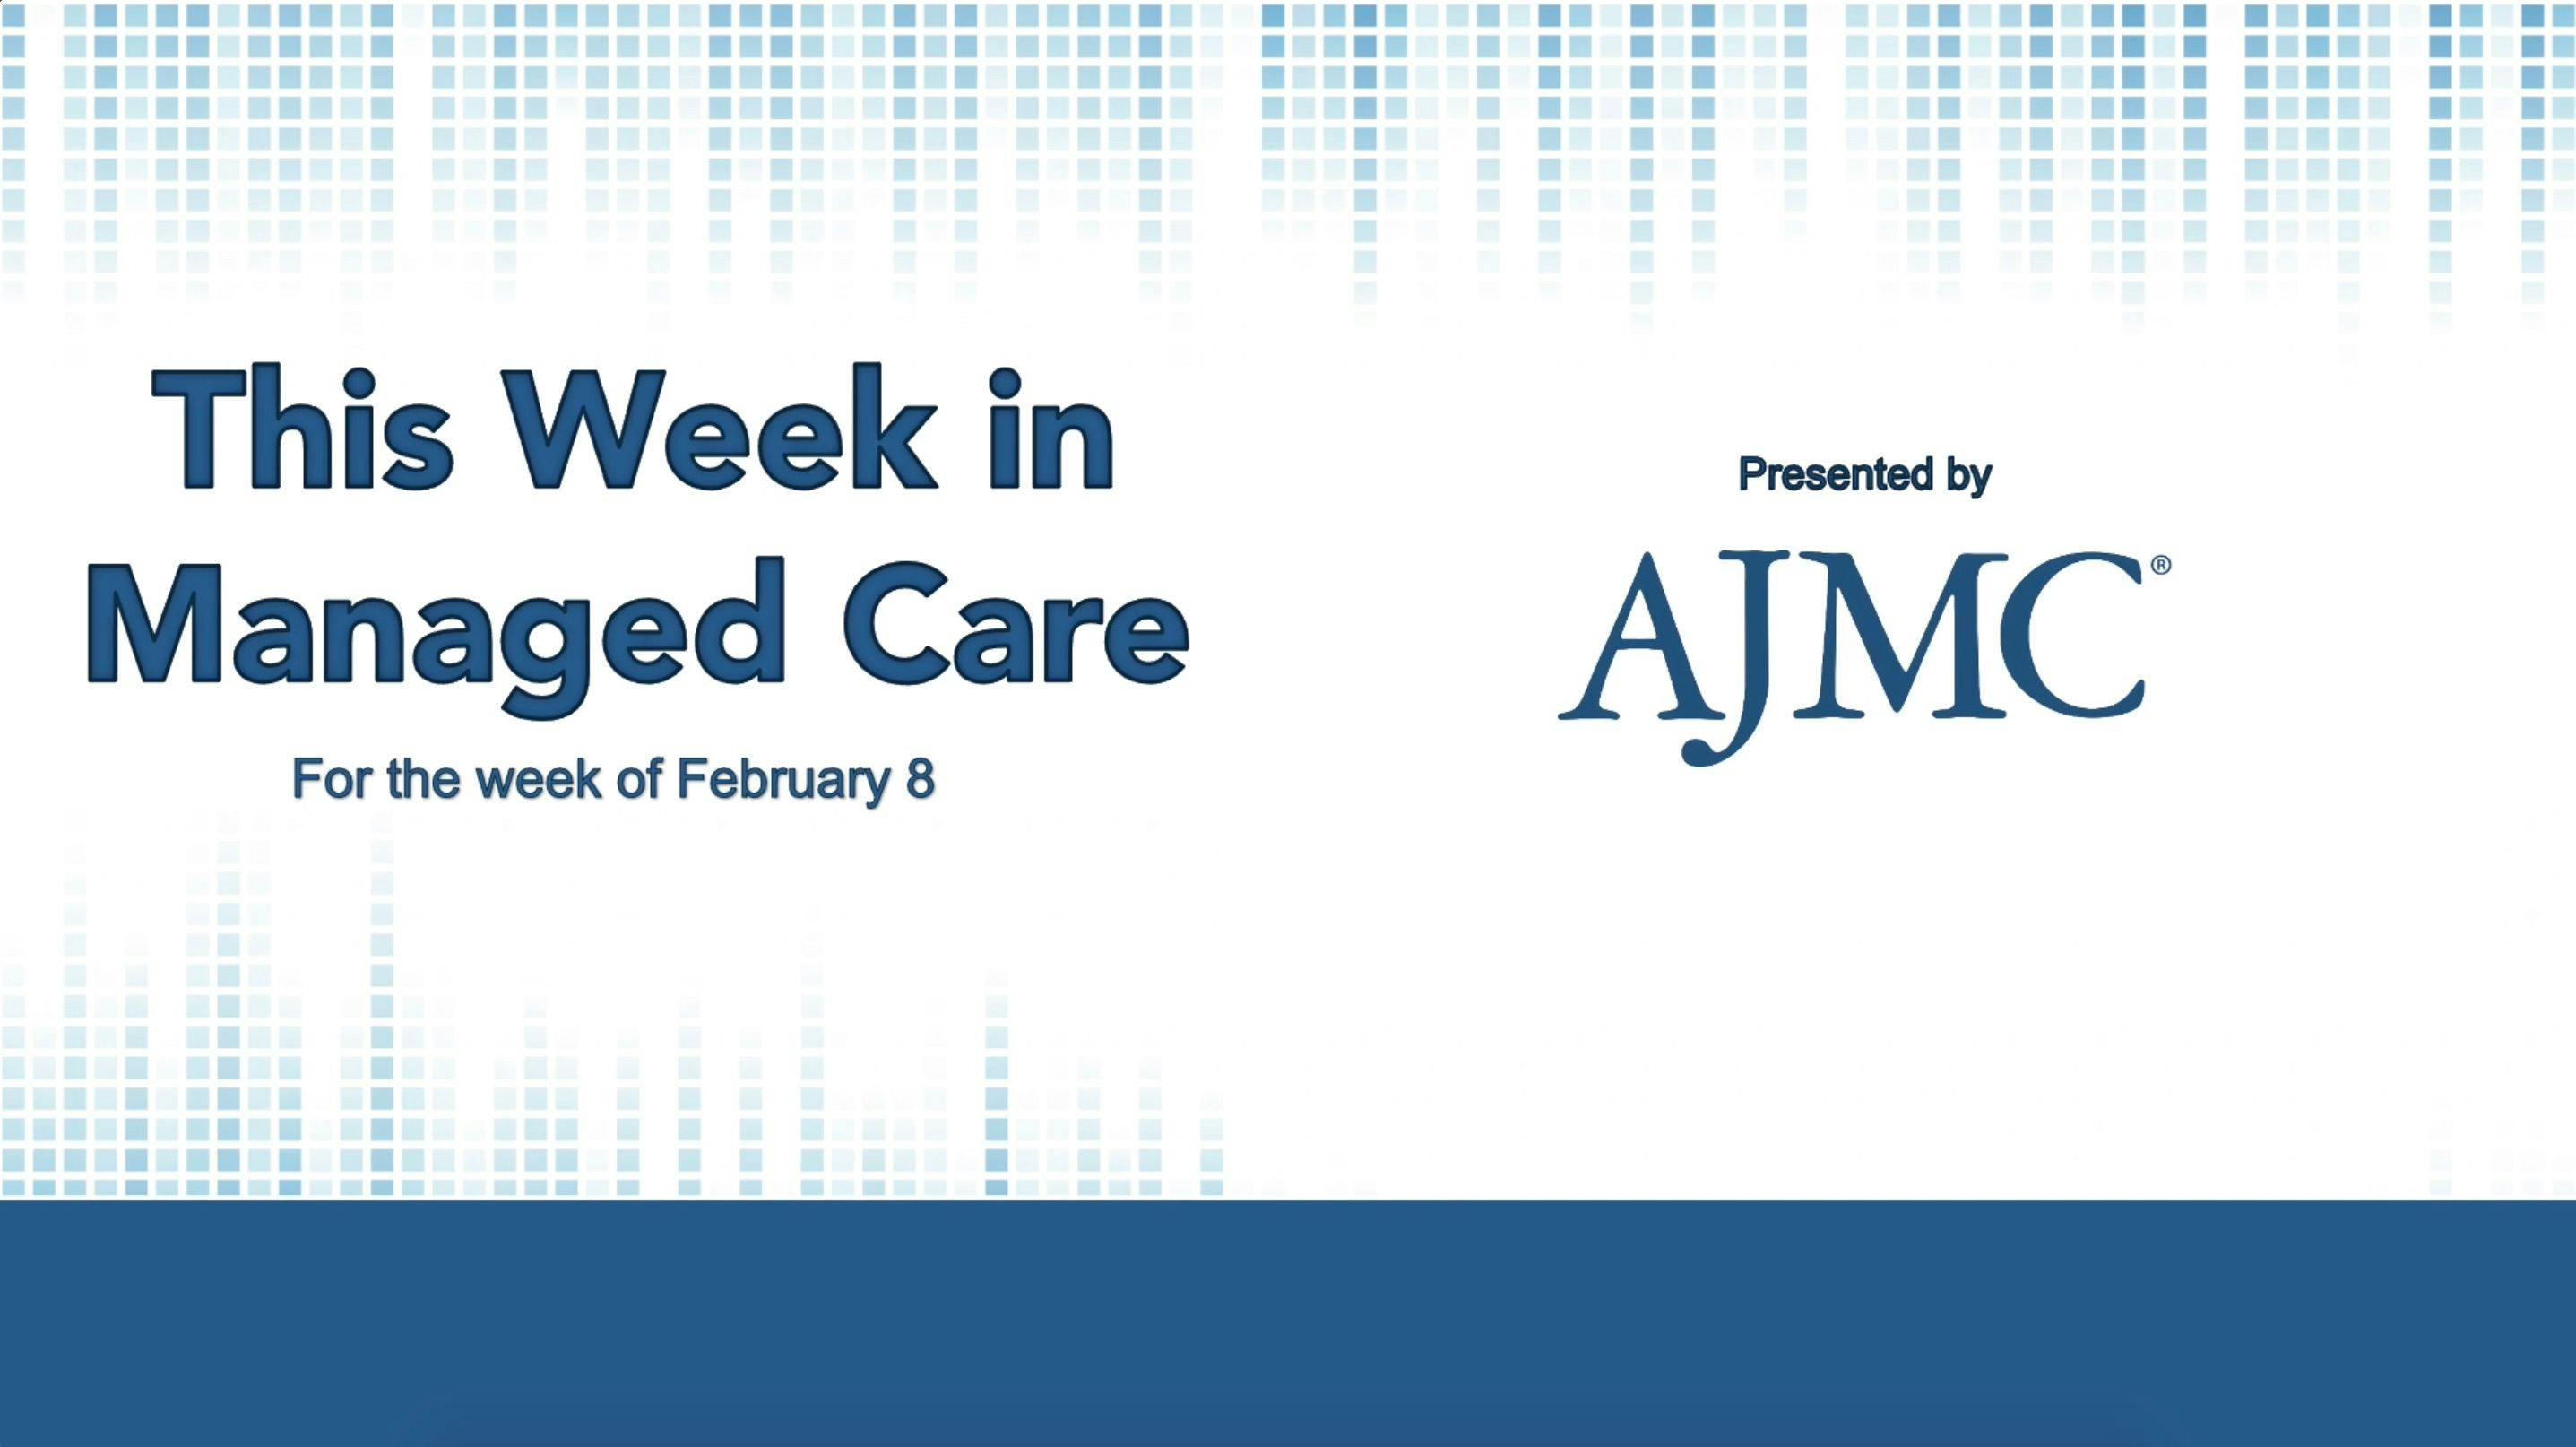 This Week in Managed Care: February 12, 2021